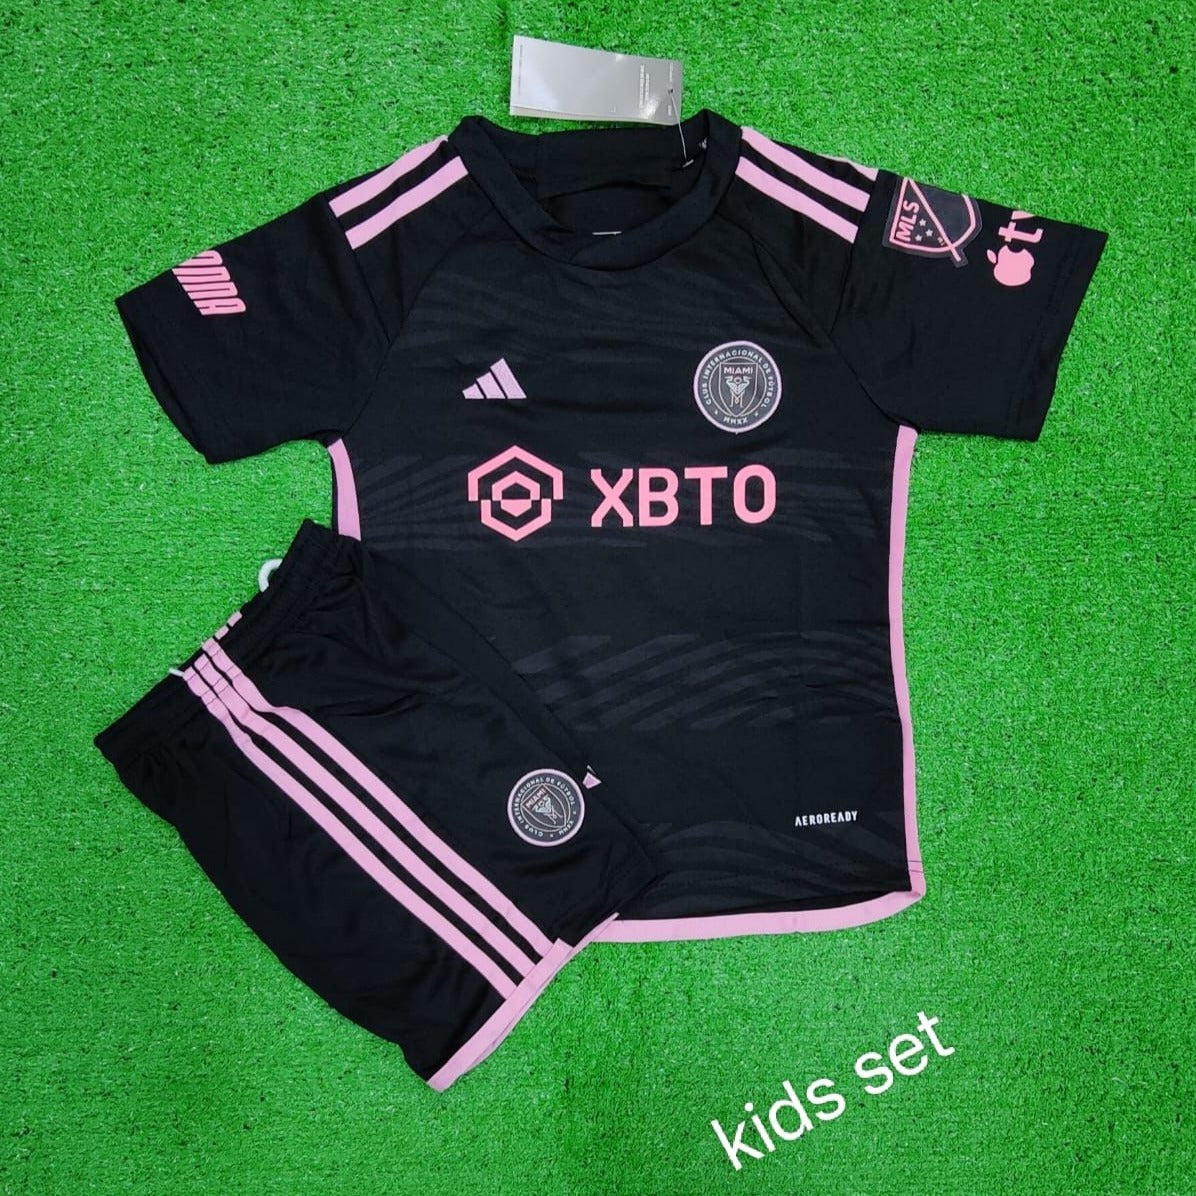 Kids Jersey - 2 pc Short and Jersey